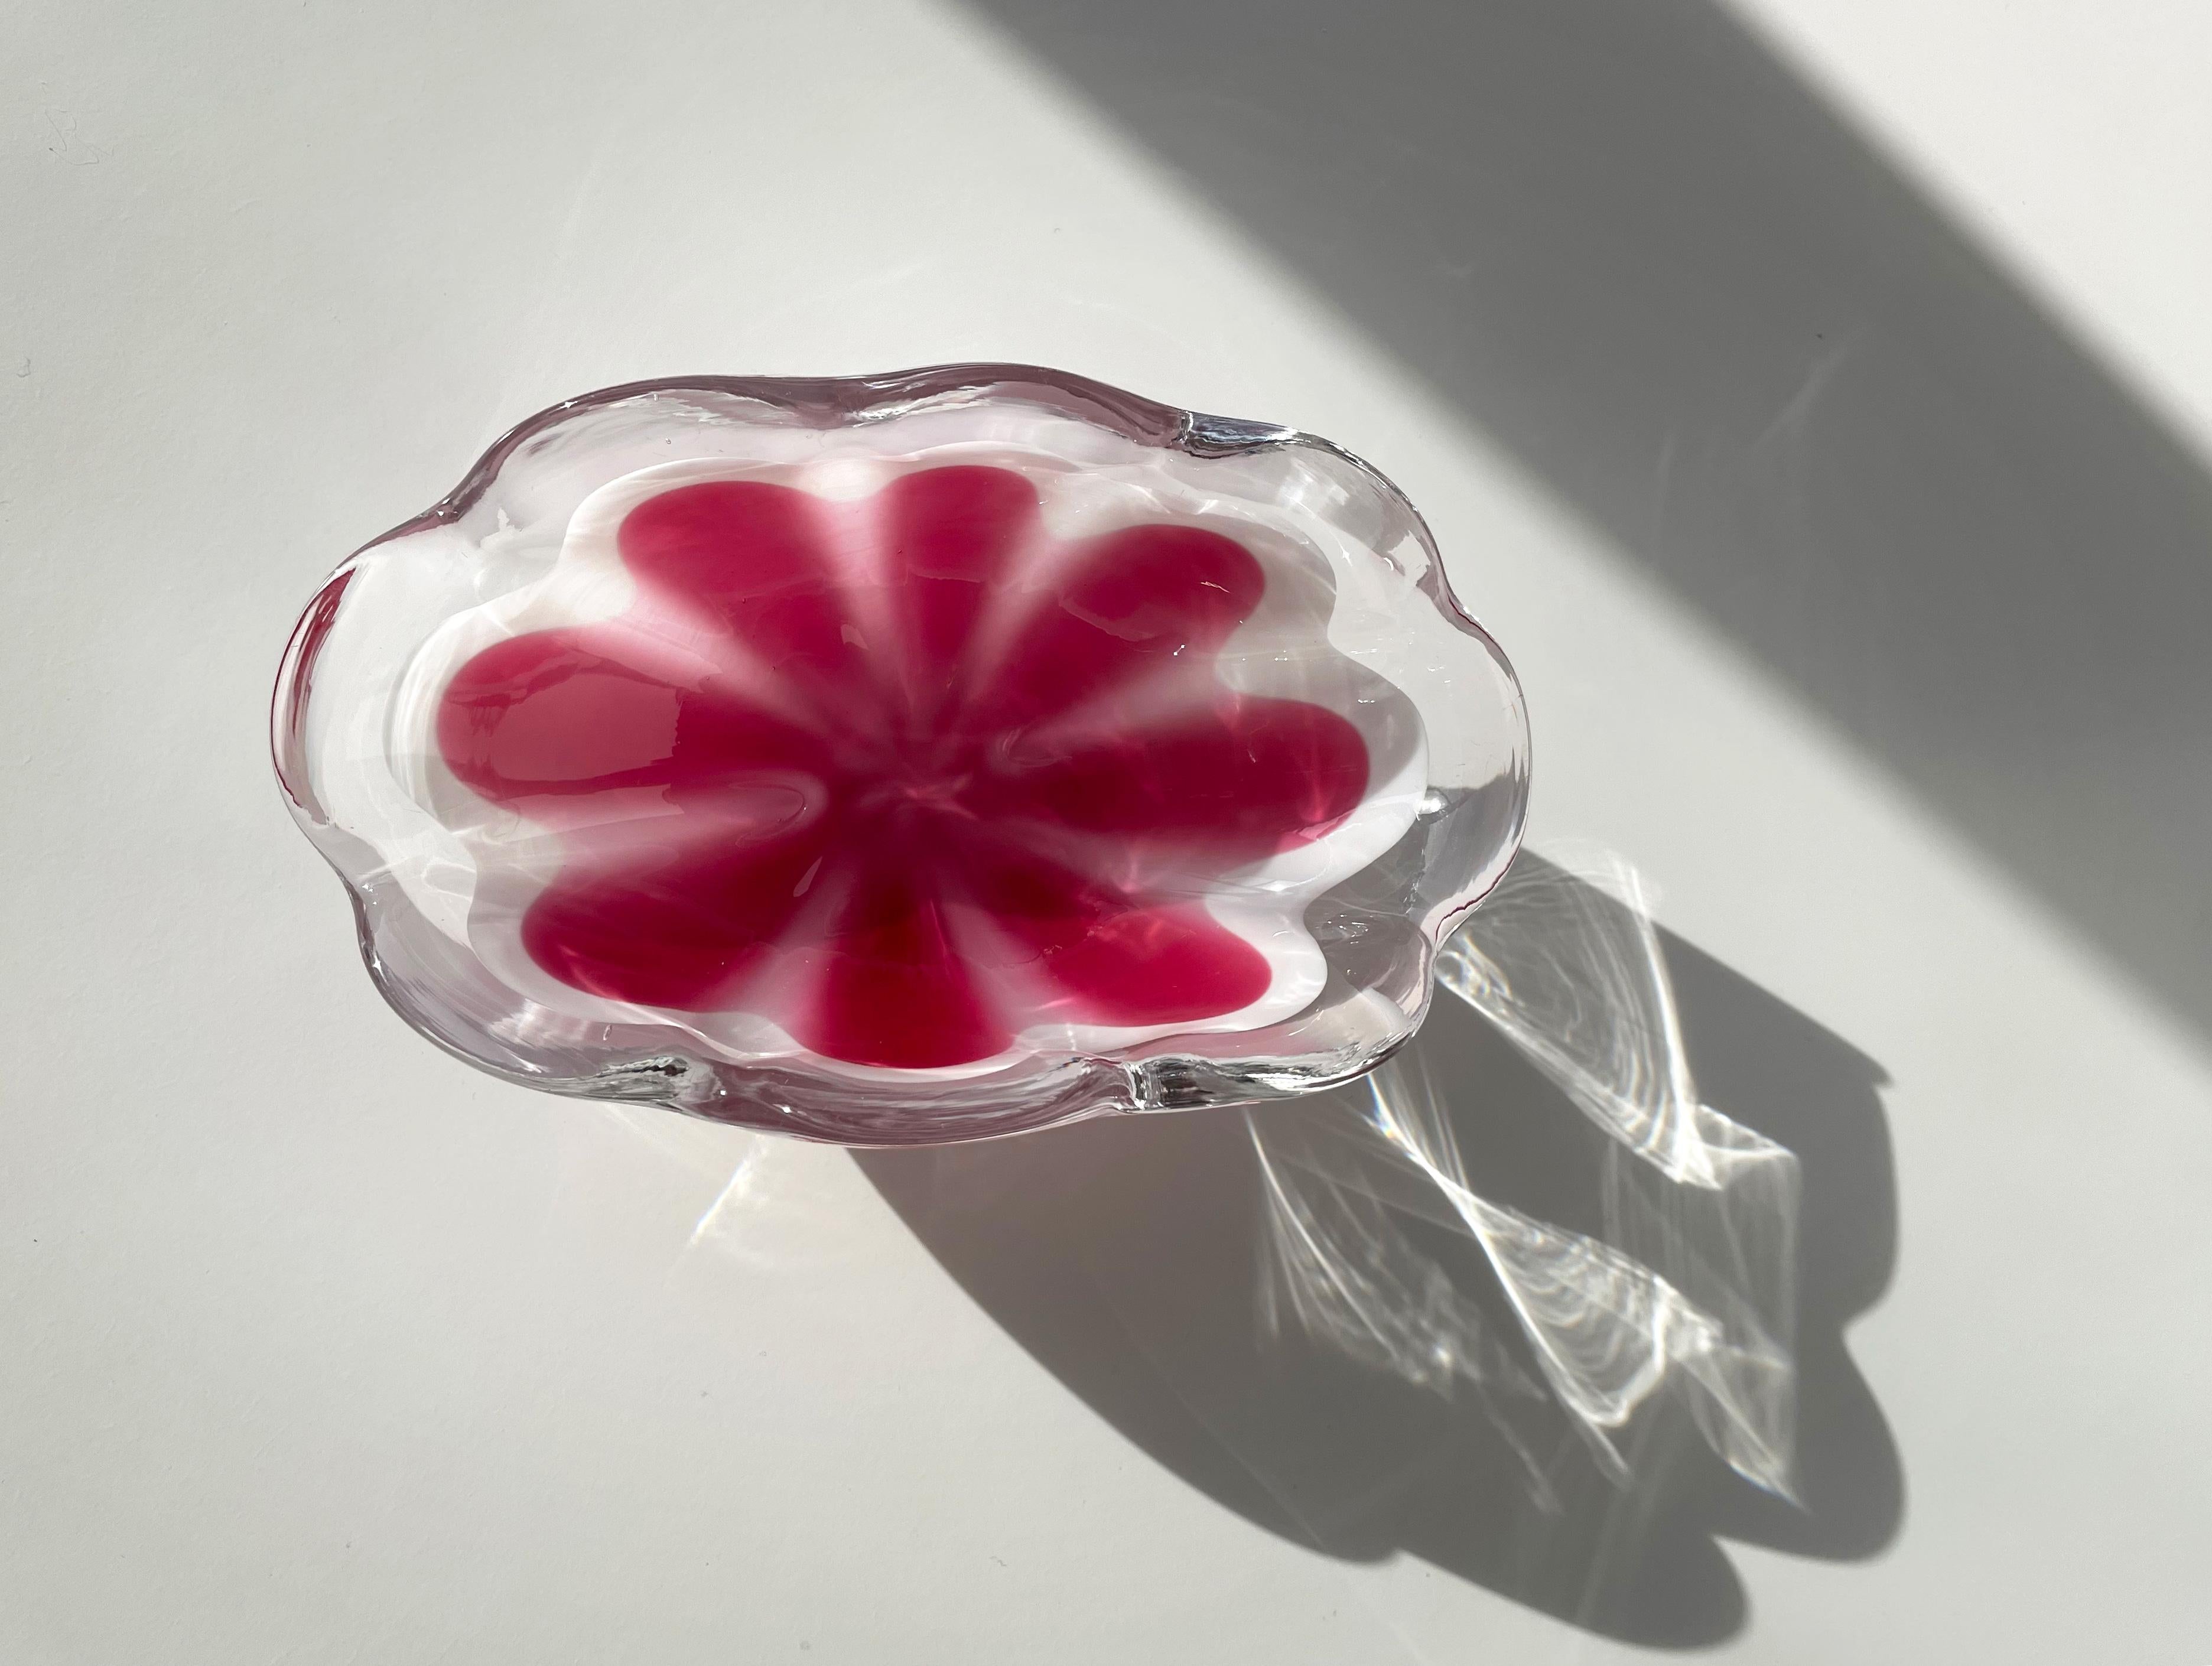 Swedish Mid-Century Modern oval art glass bowl with soft, organic shapes from the Coquille series designed by Paul Kedelv and manufactured by Flygsfors in the late 1950s. Bright pink and milky white glass encased in clear glass. Round waves around